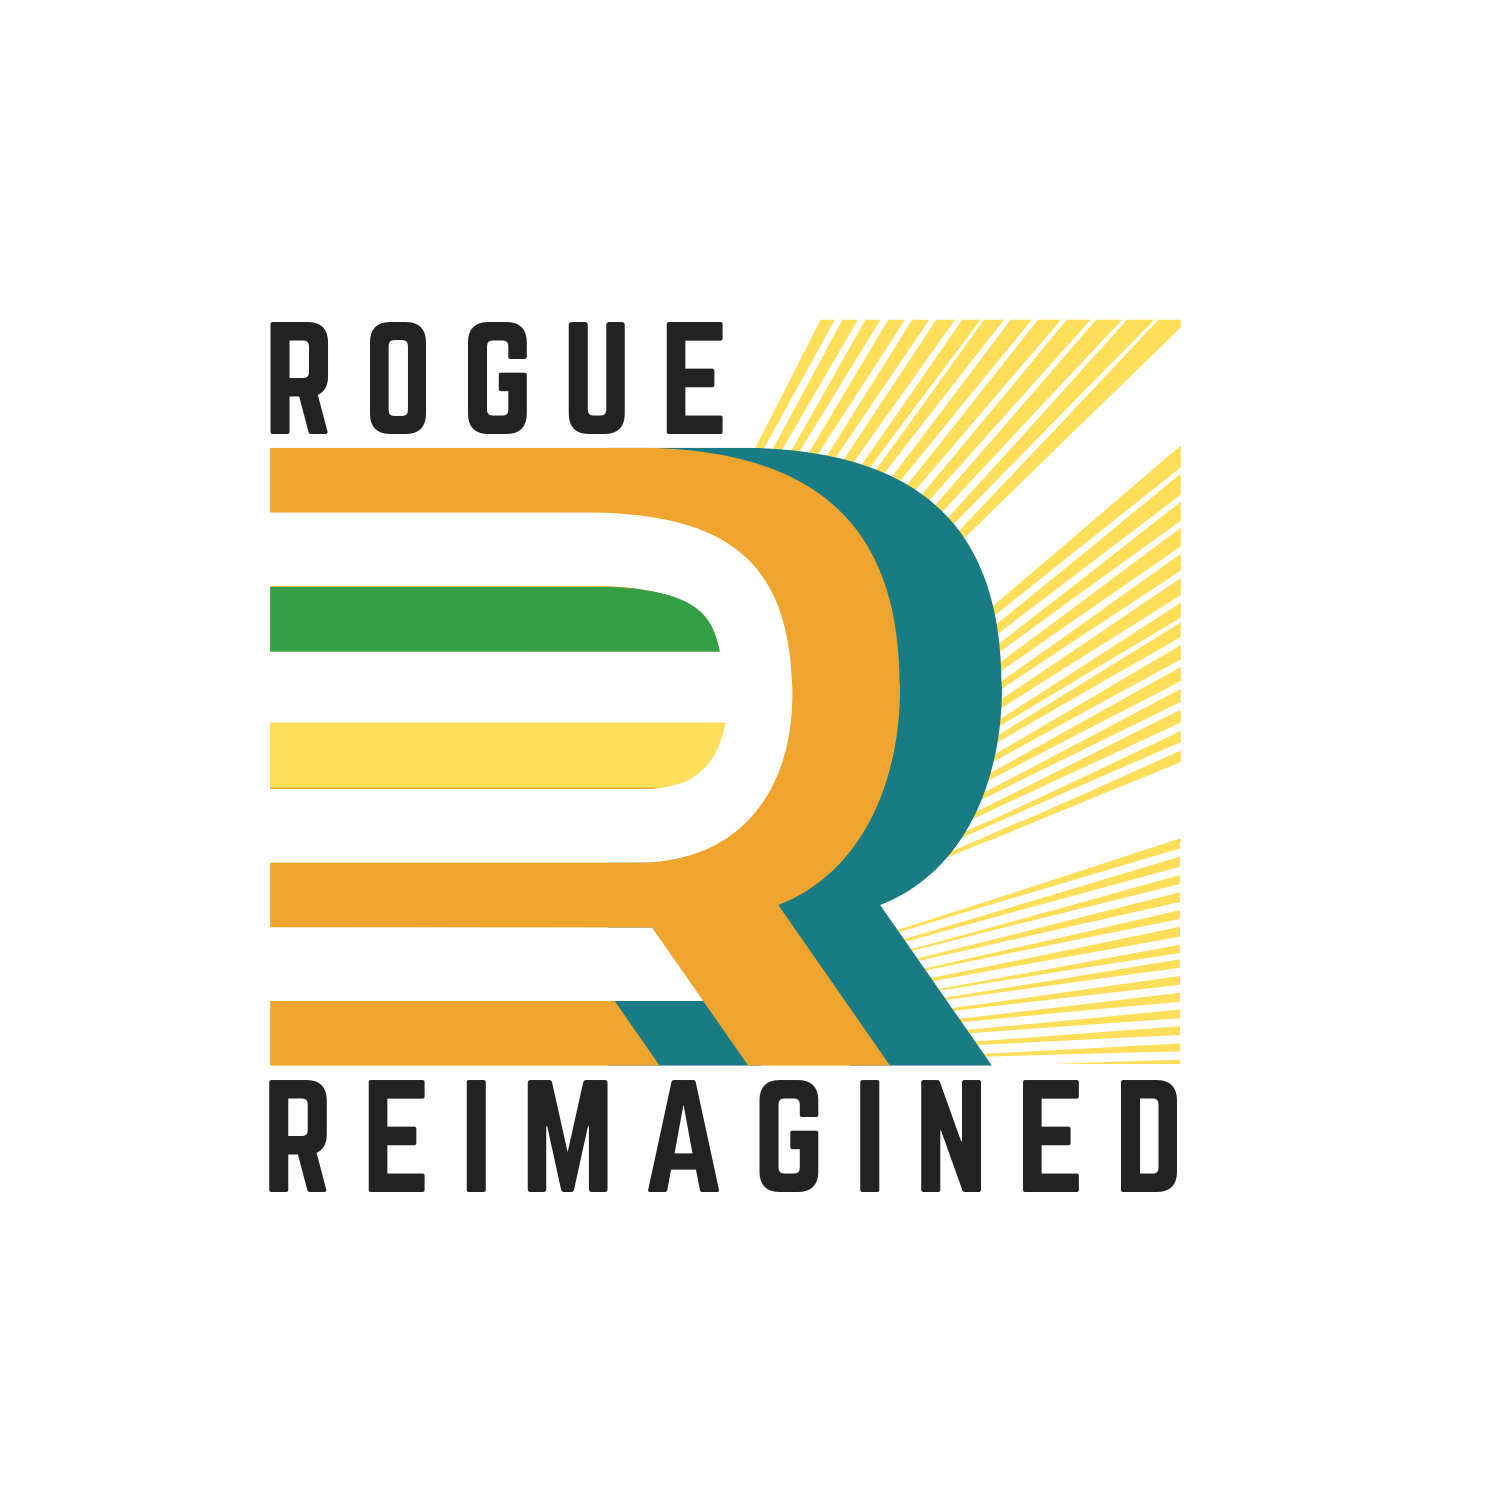 Rogue Reimagined